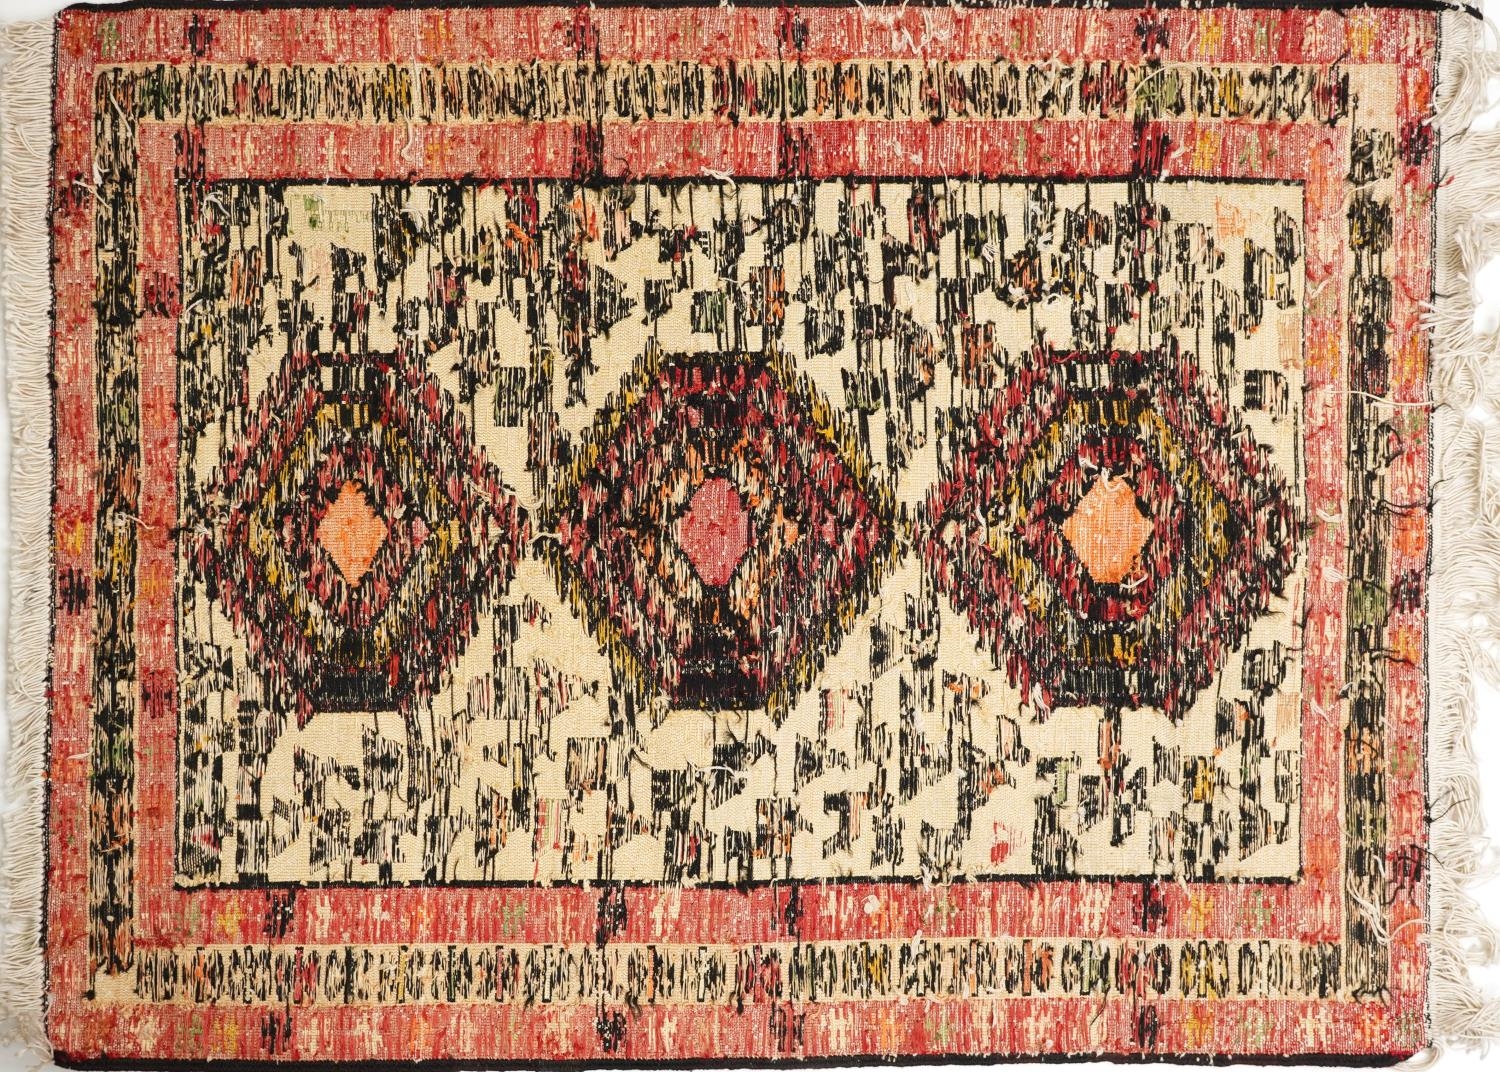 Turkish Kilim rug decorated with wild animals and flowers, 93cm x 72cm - Image 3 of 3